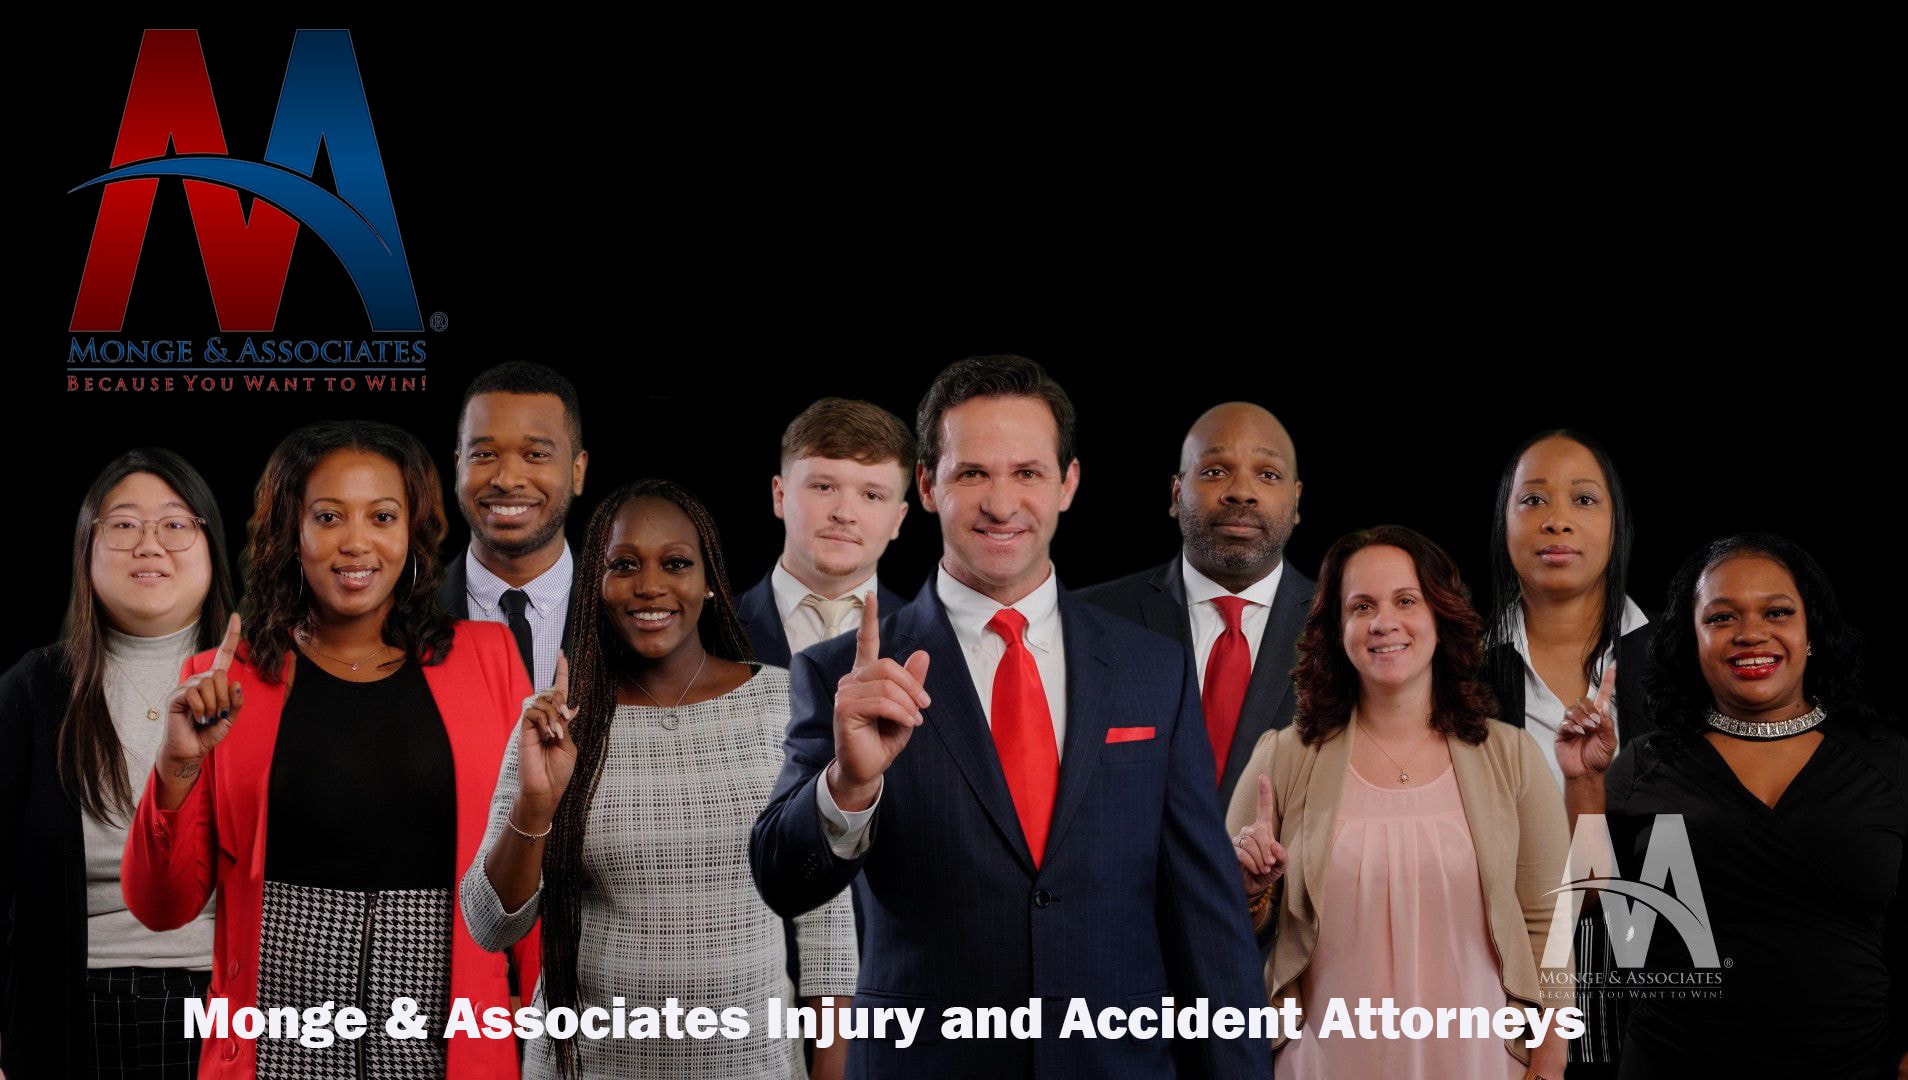 Monge & Associates Injury and Accident Attorneys - West Des Moines (IA 50265), US, personal injury law